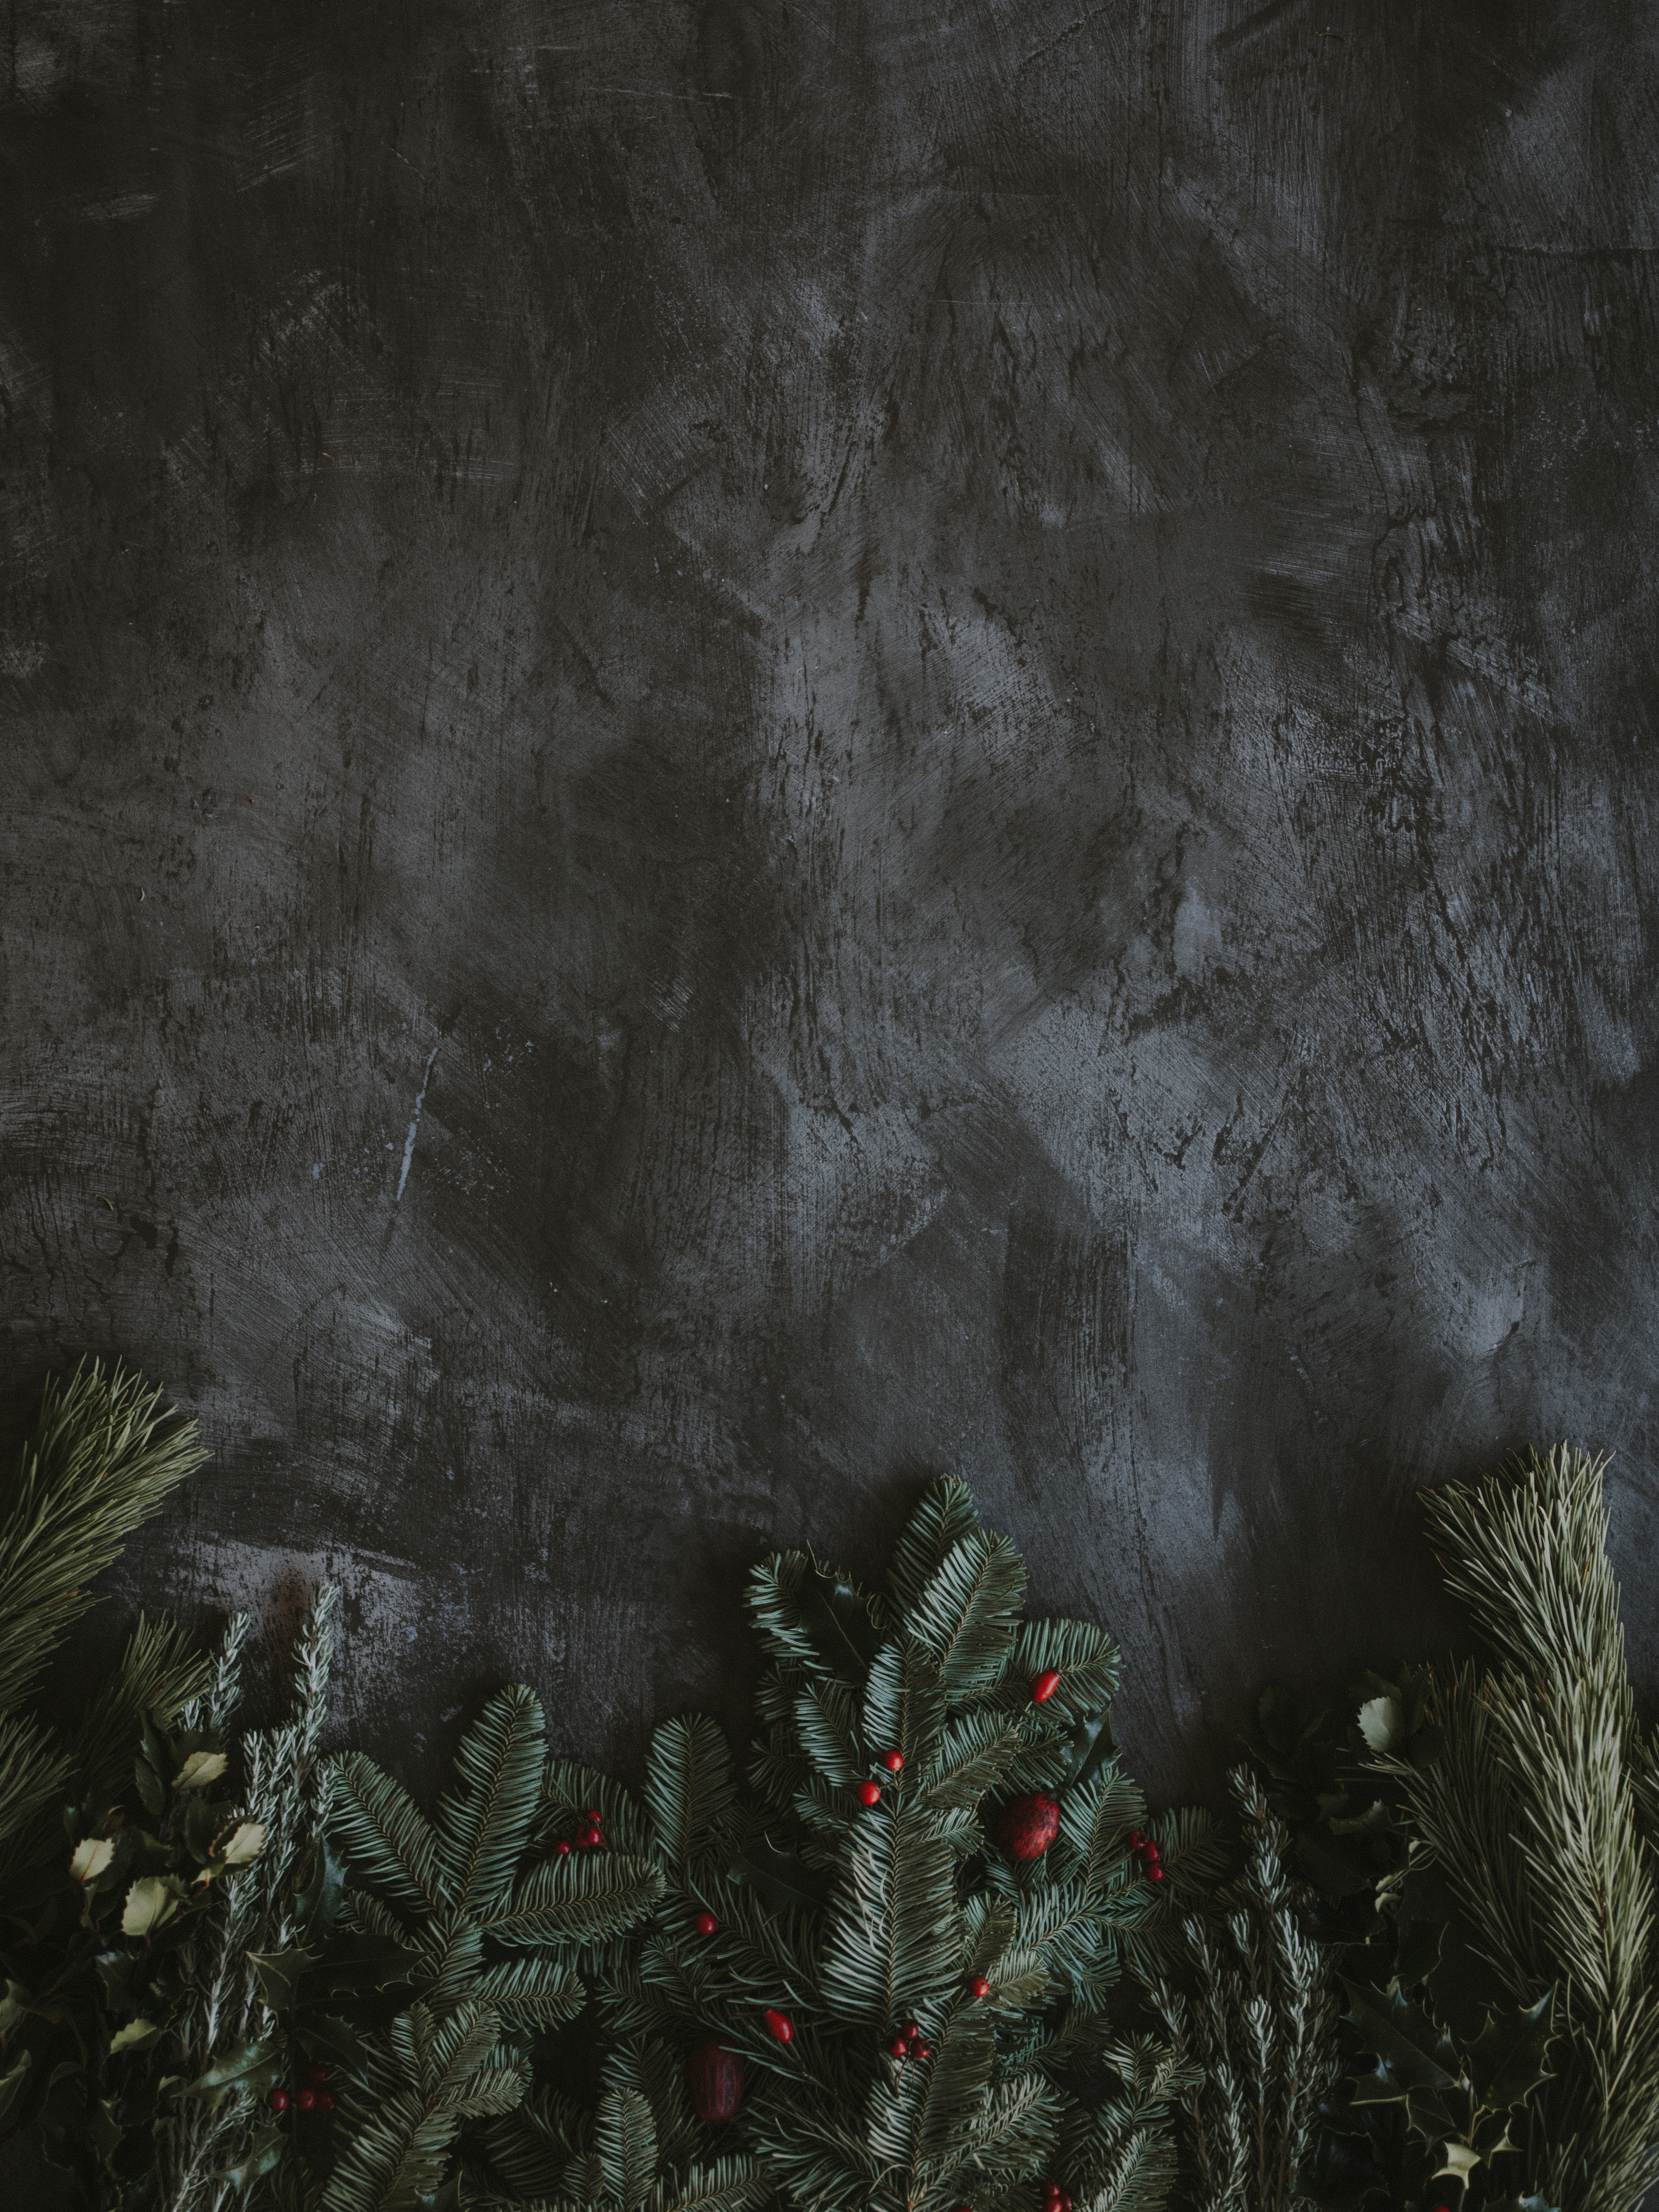 139167 download wallpaper texture, textures, berries, branches, spruce, fir, grunge screensavers and pictures for free